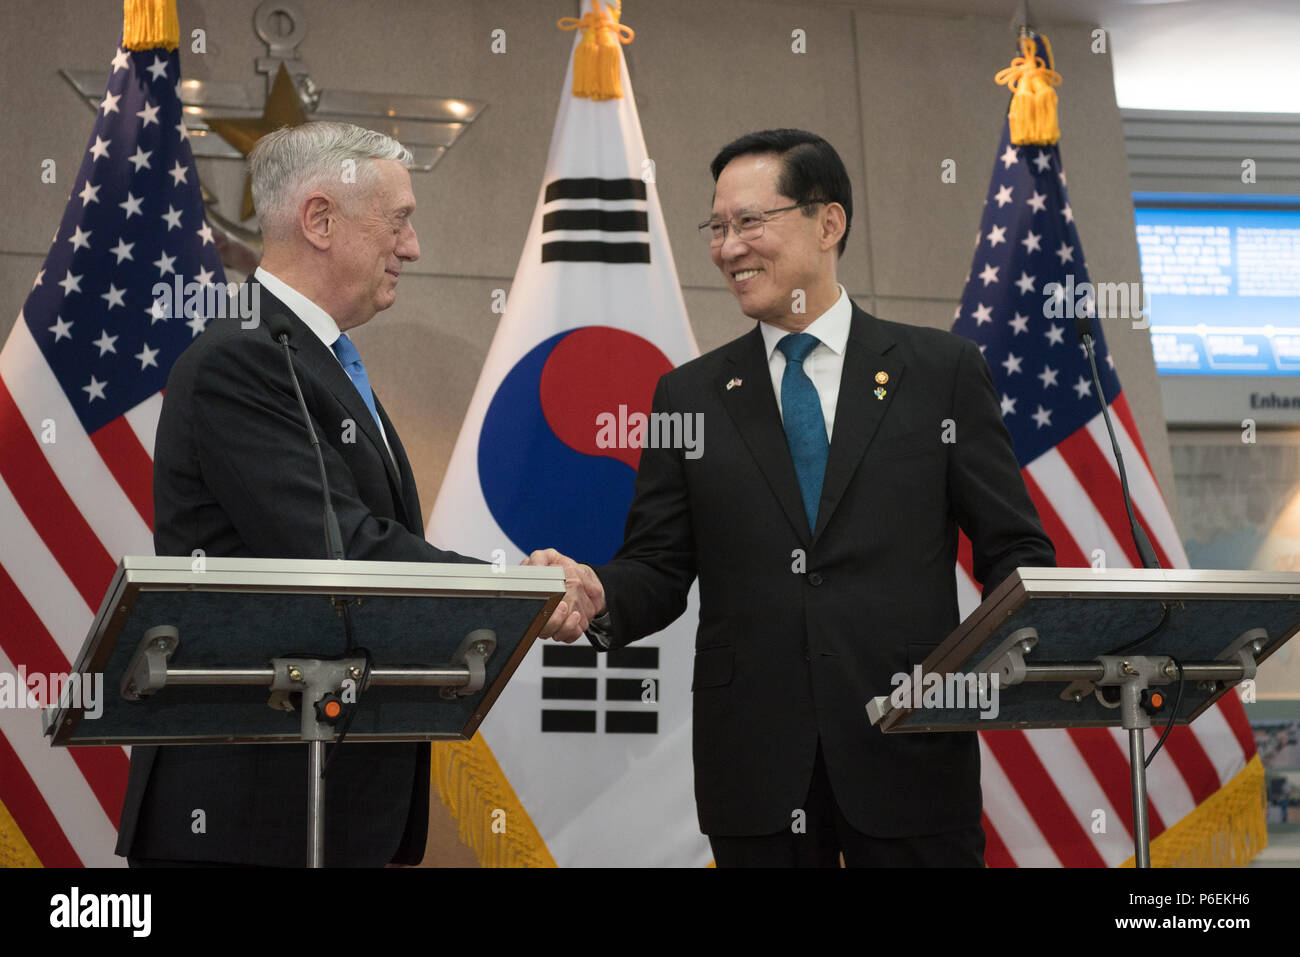 U.S. Secretary of Defense James N. Mattis meets with Song Young-moo, the minister of national defense for the Republic of Korea, at the South Korean Defense Ministerial Seoul, South Korea, June 28, 2018. (DoD photo by Army Sgt. Amber I. Smith) Stock Photo